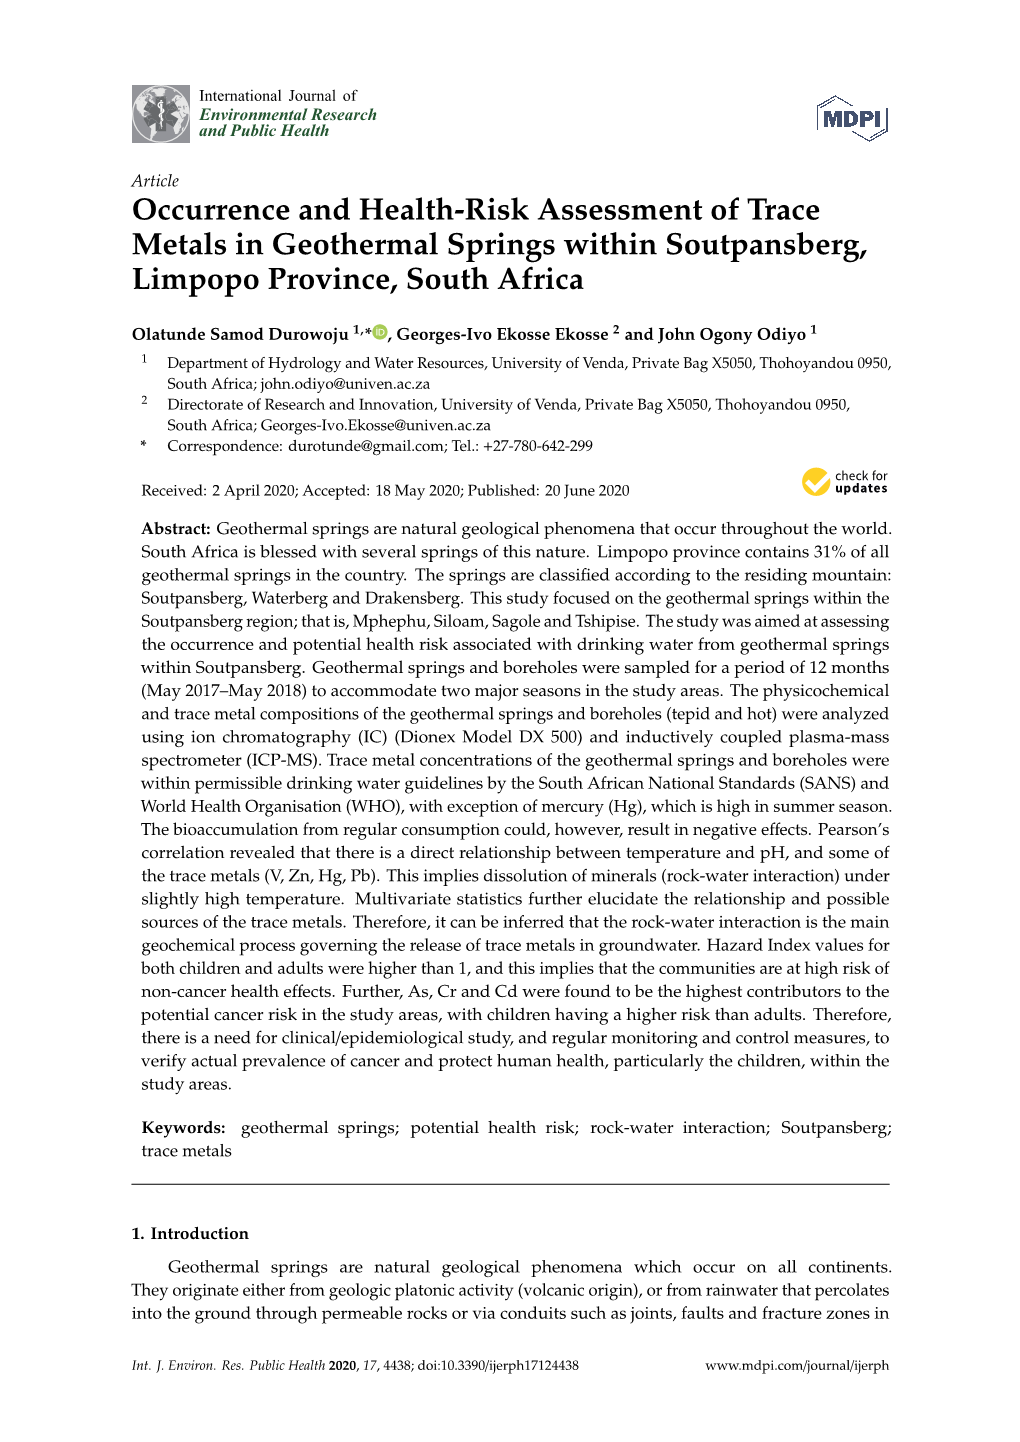 Occurrence and Health-Risk Assessment of Trace Metals in Geothermal Springs Within Soutpansberg, Limpopo Province, South Africa